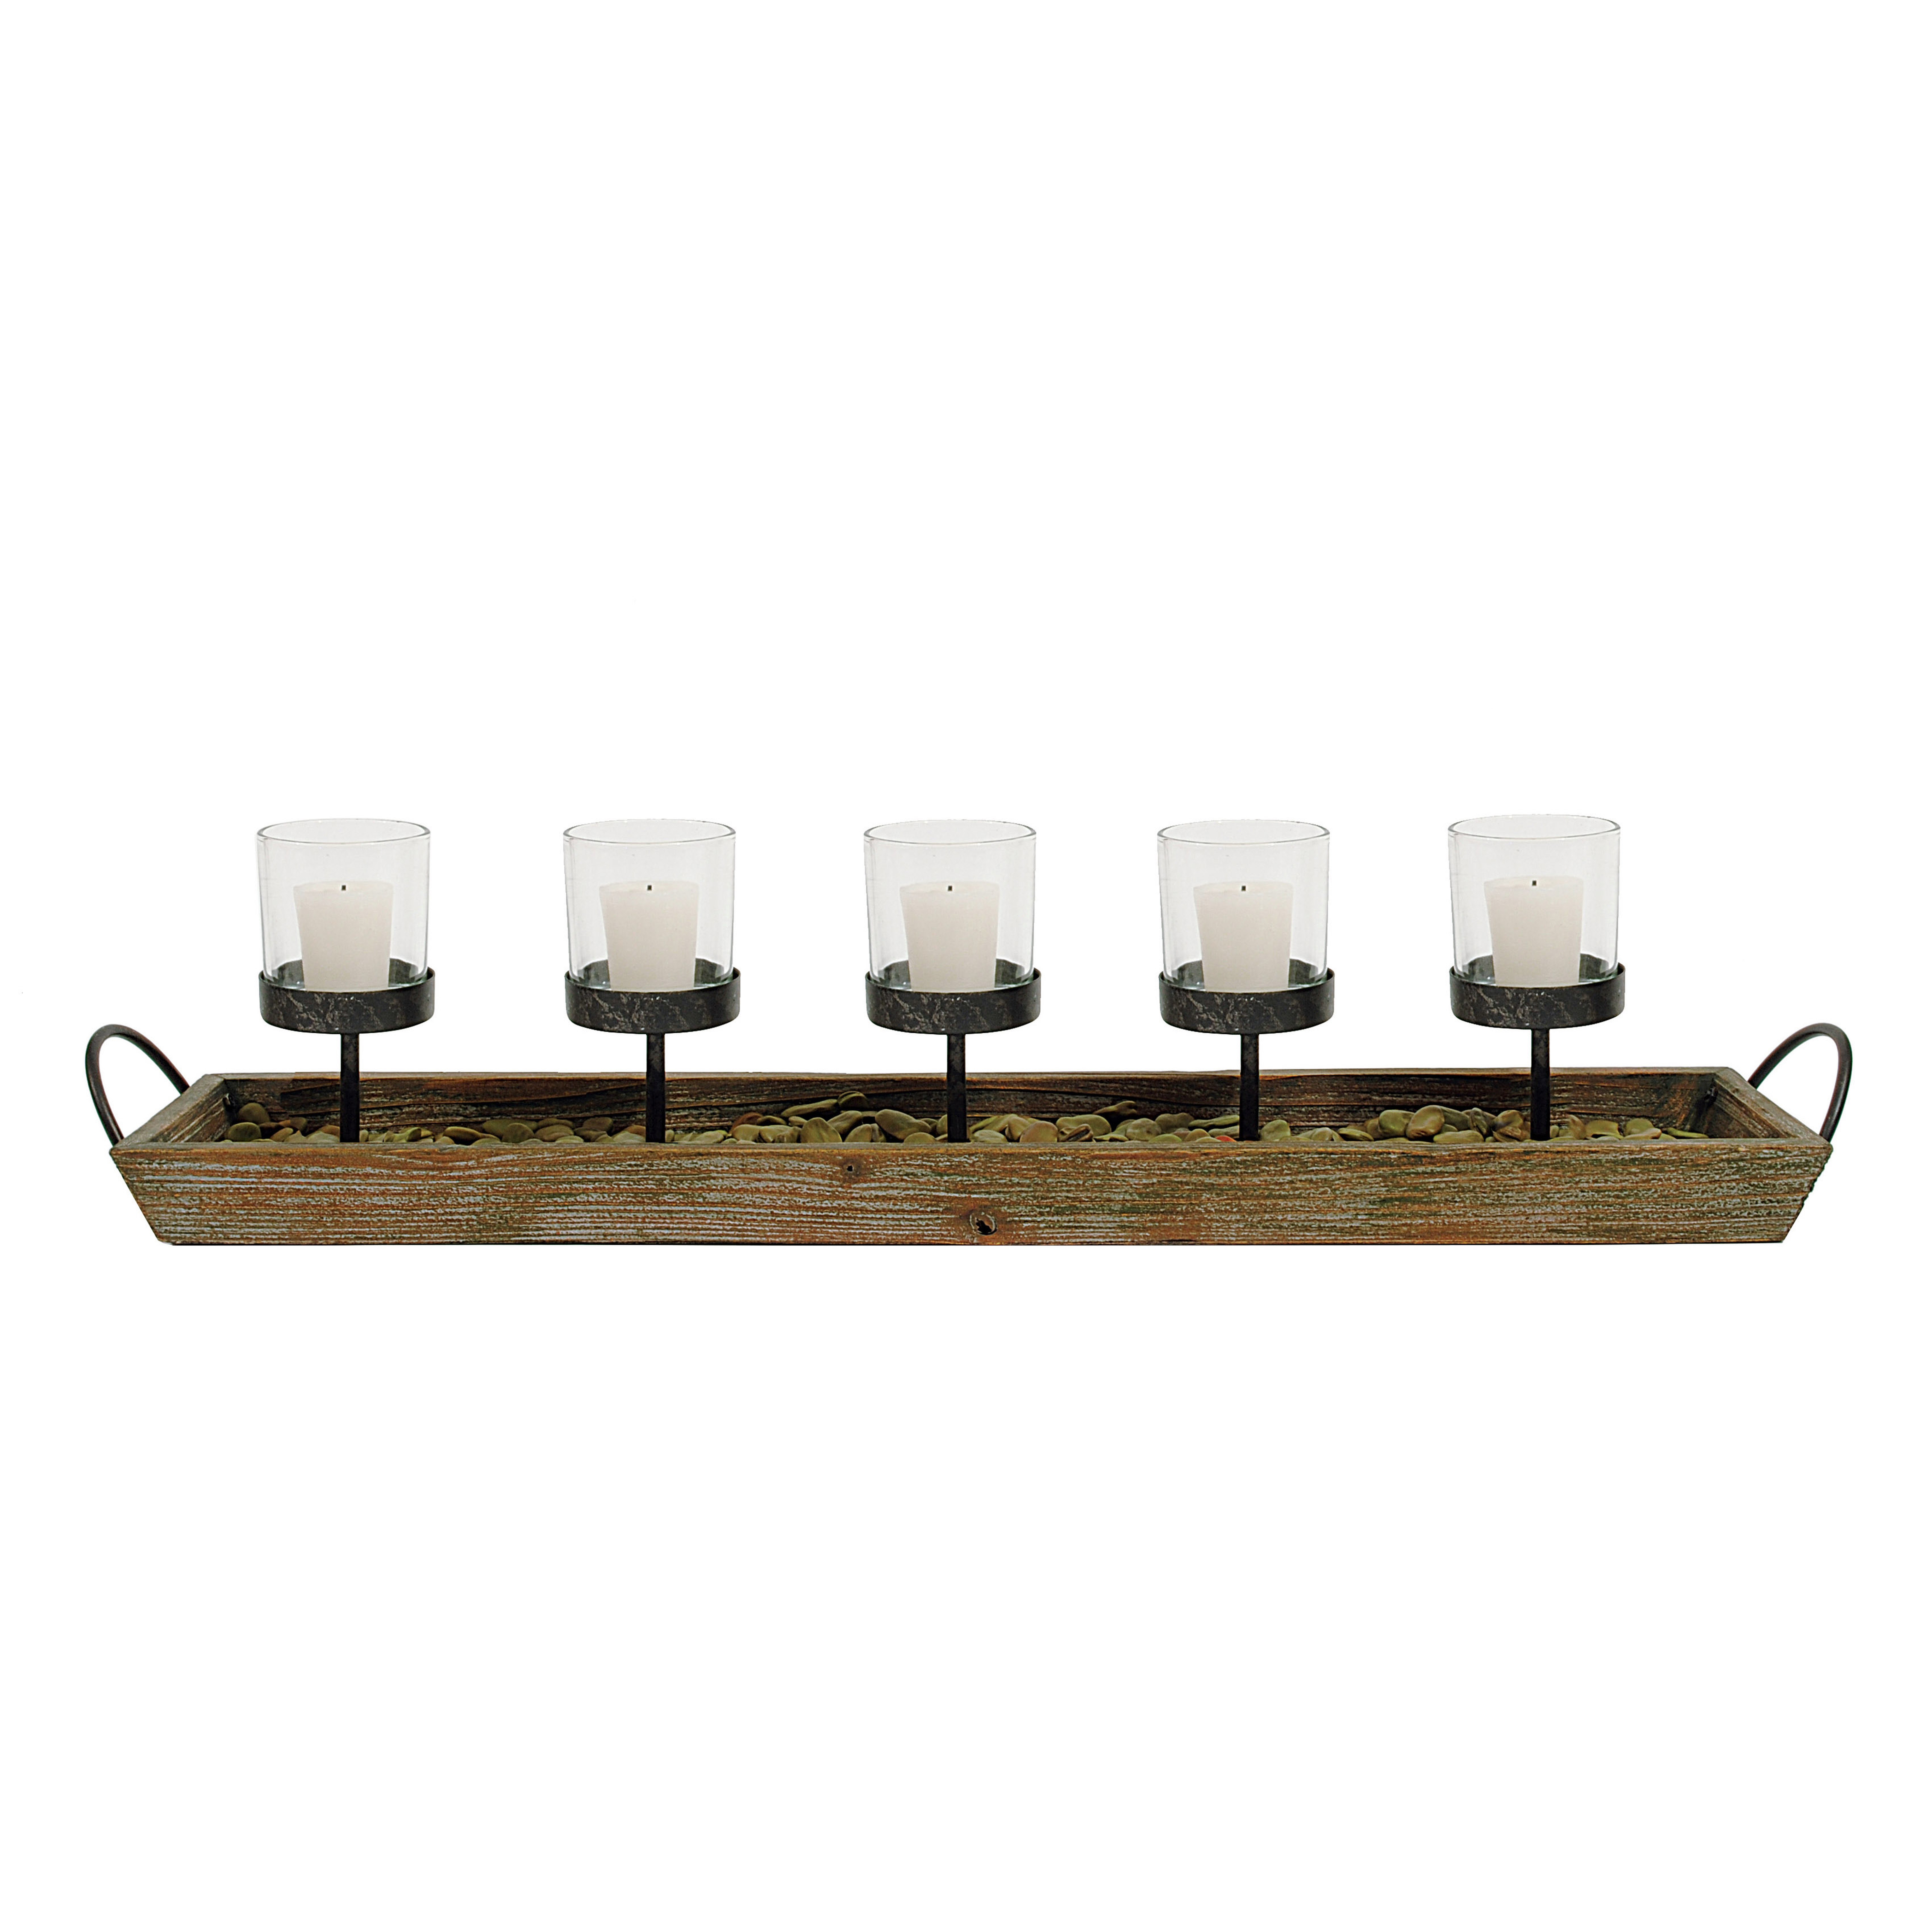 Metal Votive Candle Holders in Rectangle Wood Tray with Candles, Set of 5 - Nomad Home